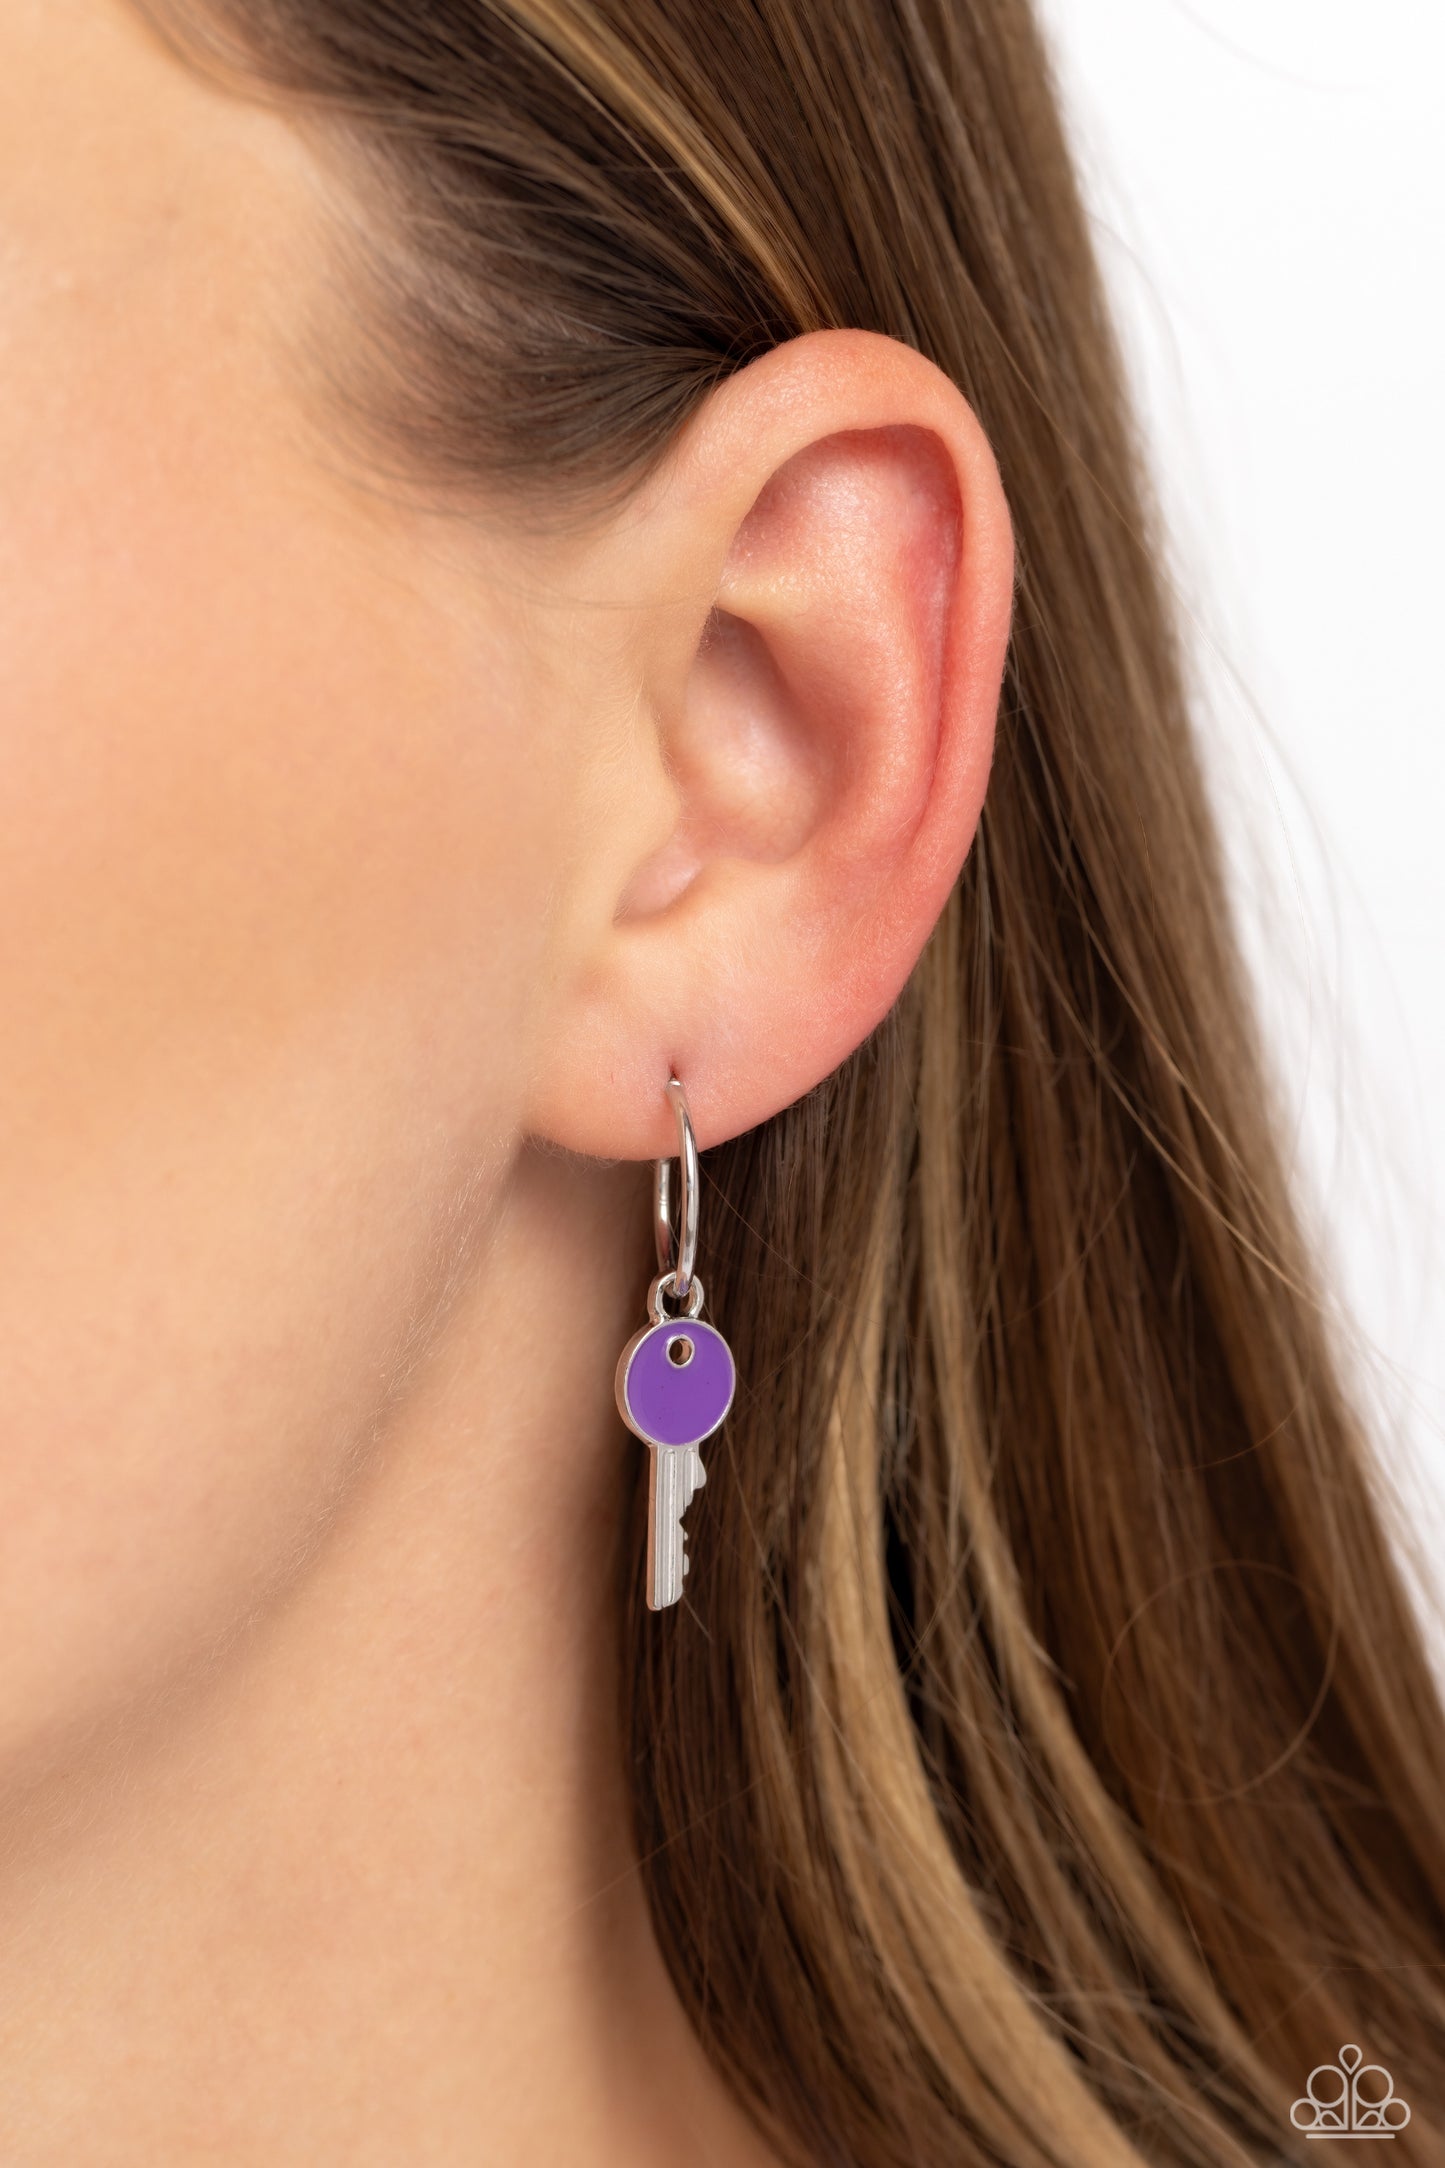 Key Performance Purple Tiny Hoop Earring - Paparazzi Accessories  A small, skinny, shiny silver hoop curves around the ear in a timeless fashion. A shiny silver ball is affixed to the end of the hoop, reminiscent of a barbell fitting. A silver key charm, featuring a bright purple-painted accent, slides along the curvature of the hoop, adding a surprising hint of colorful movement. Earring attaches to a standard post fitting. Hoop measures approximately 1/2" in diameter. P5HO-PRXX-026XX